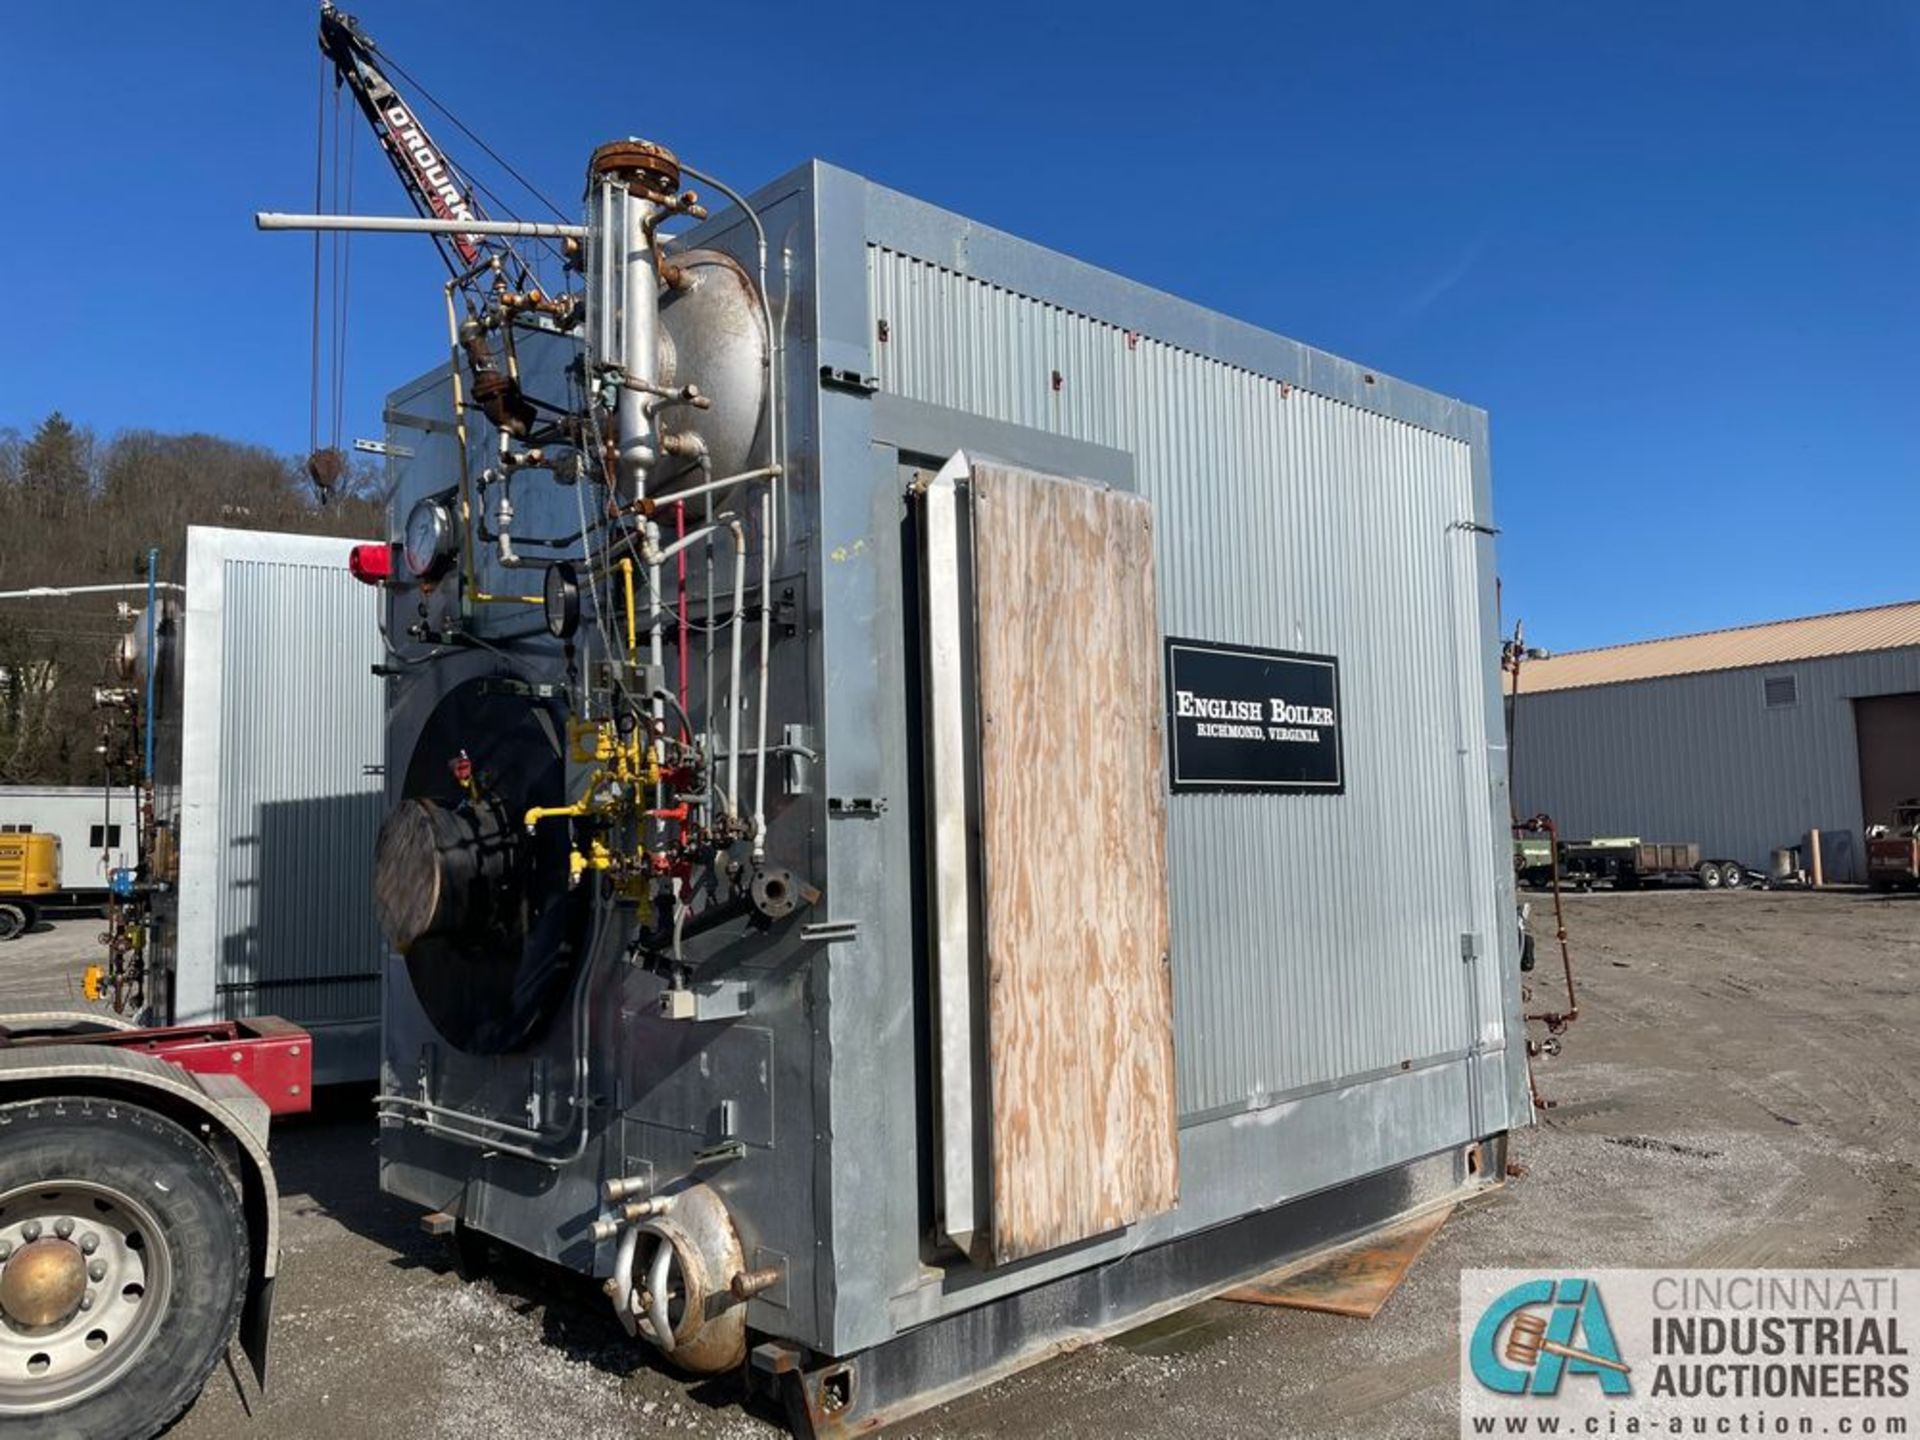 ****2,047 SQ. FT. ENGLISH BOILER 25-DR-250 GAS FIRED STEAM BOILER; S/N 31003-1**Bid confirmation - Image 3 of 26